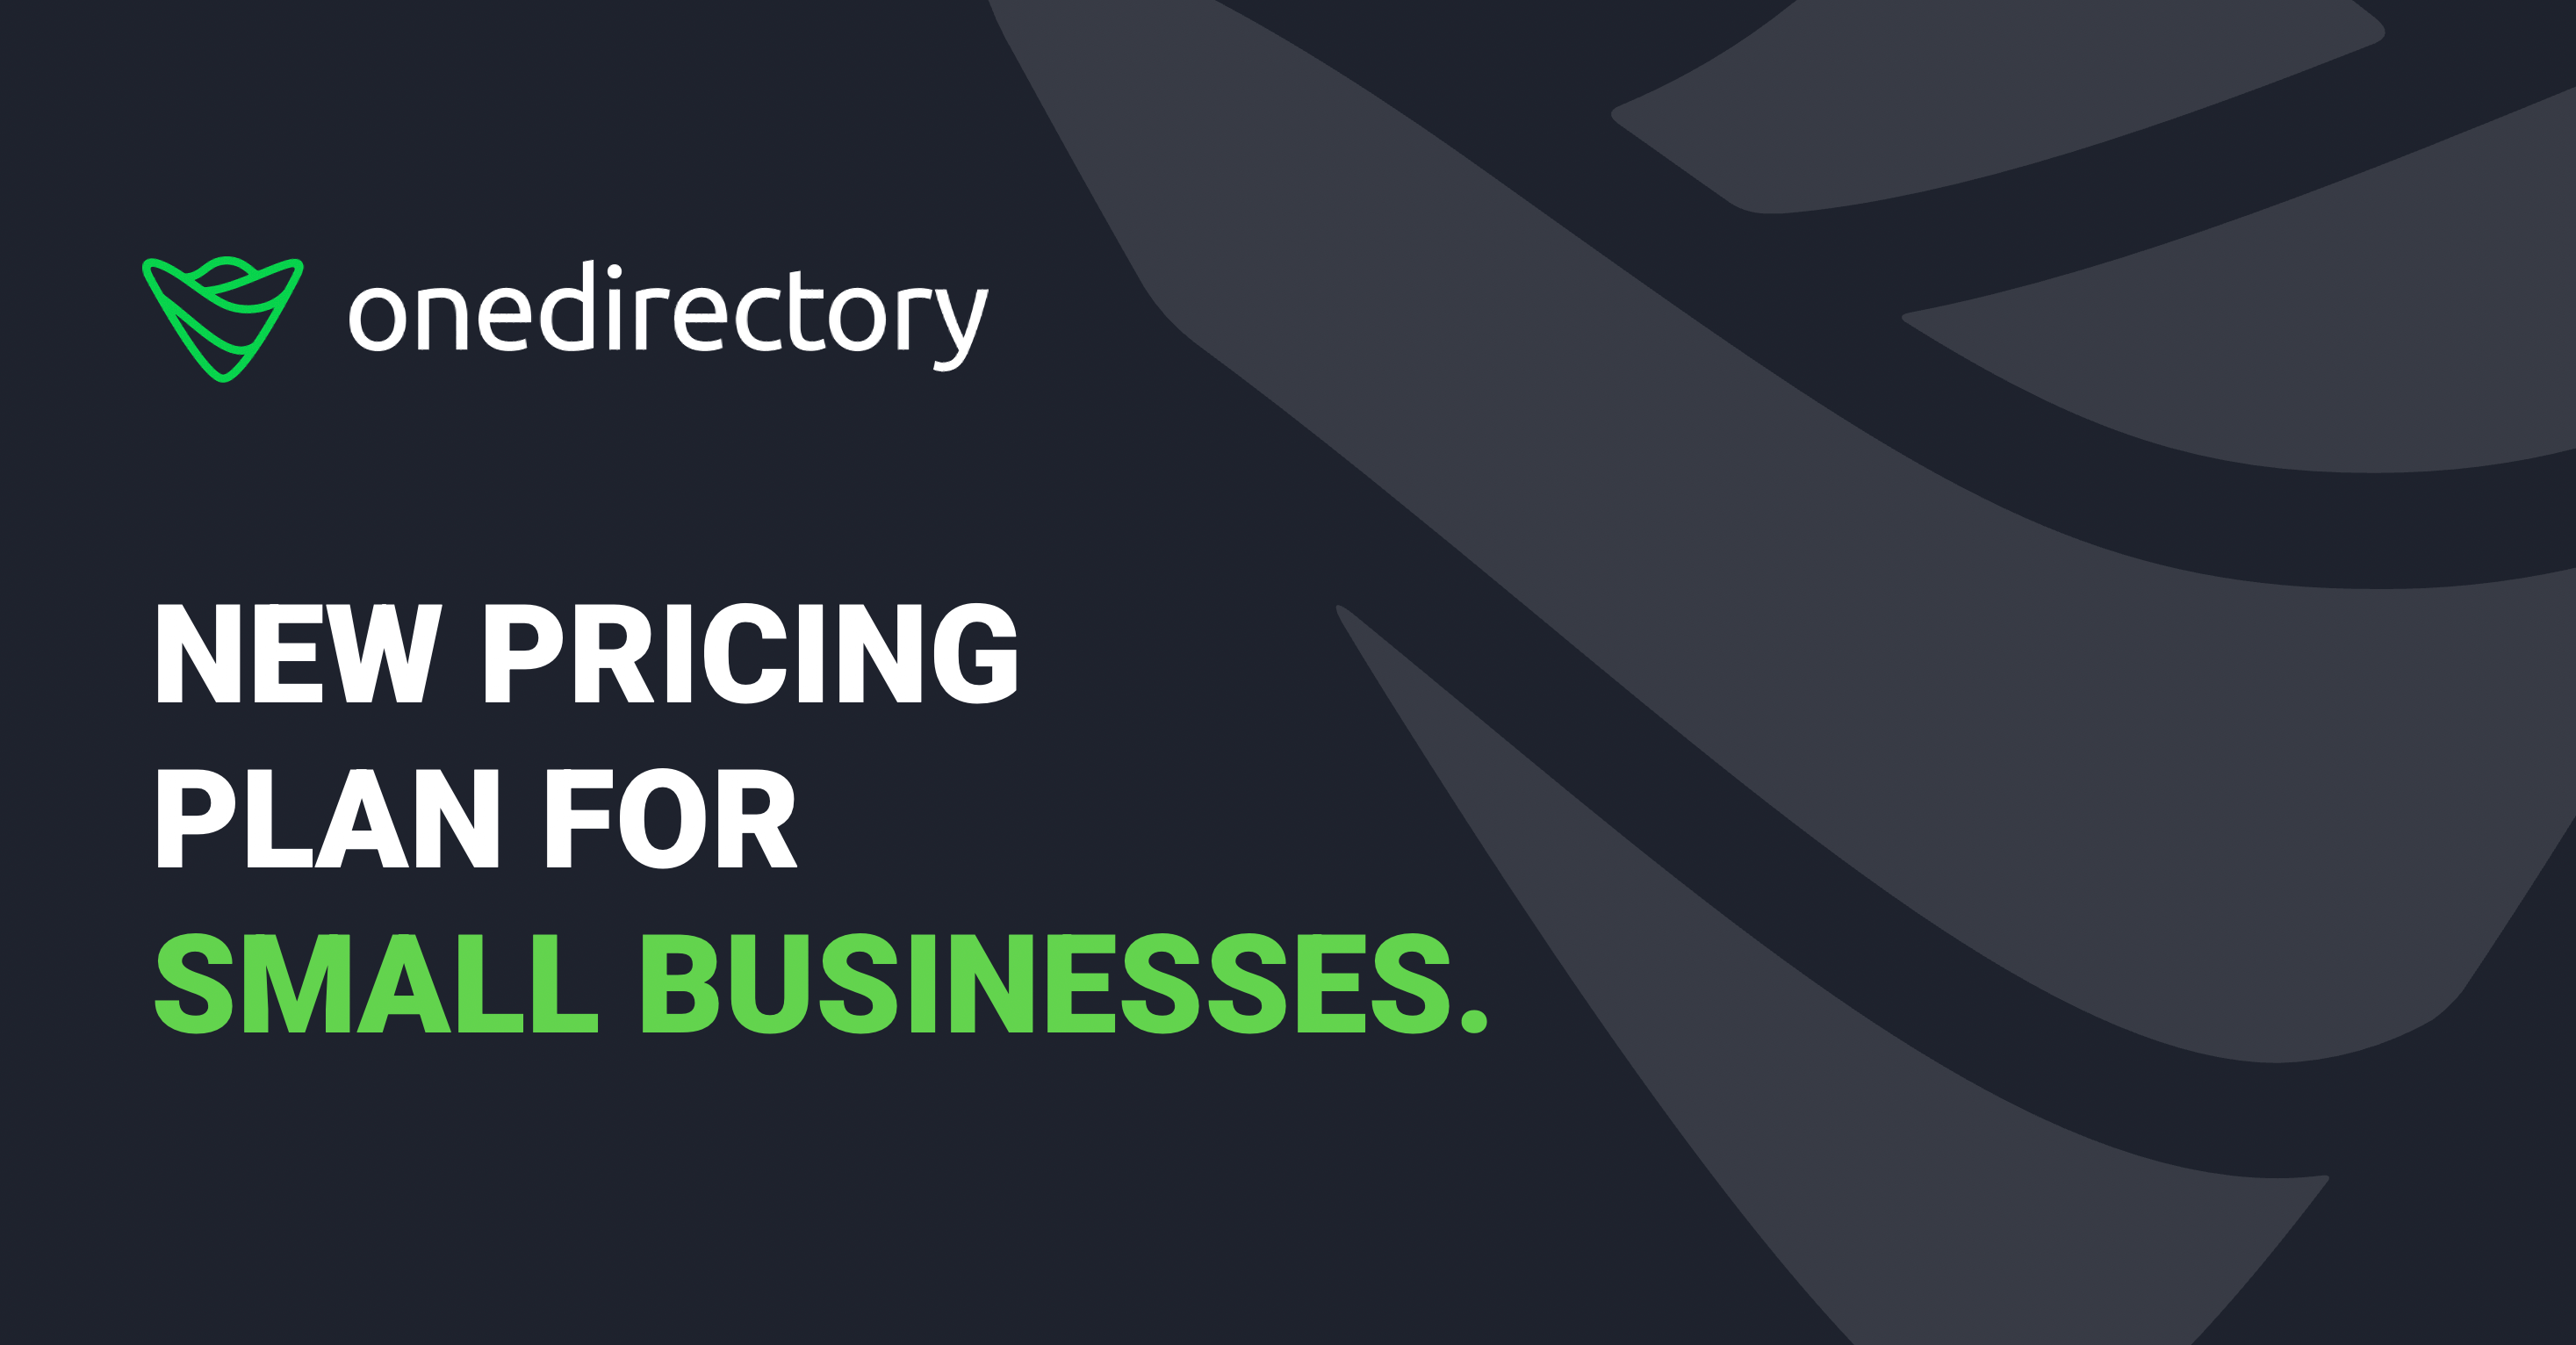 OneDirectory Launches New Pricing Plan for Small Businesses